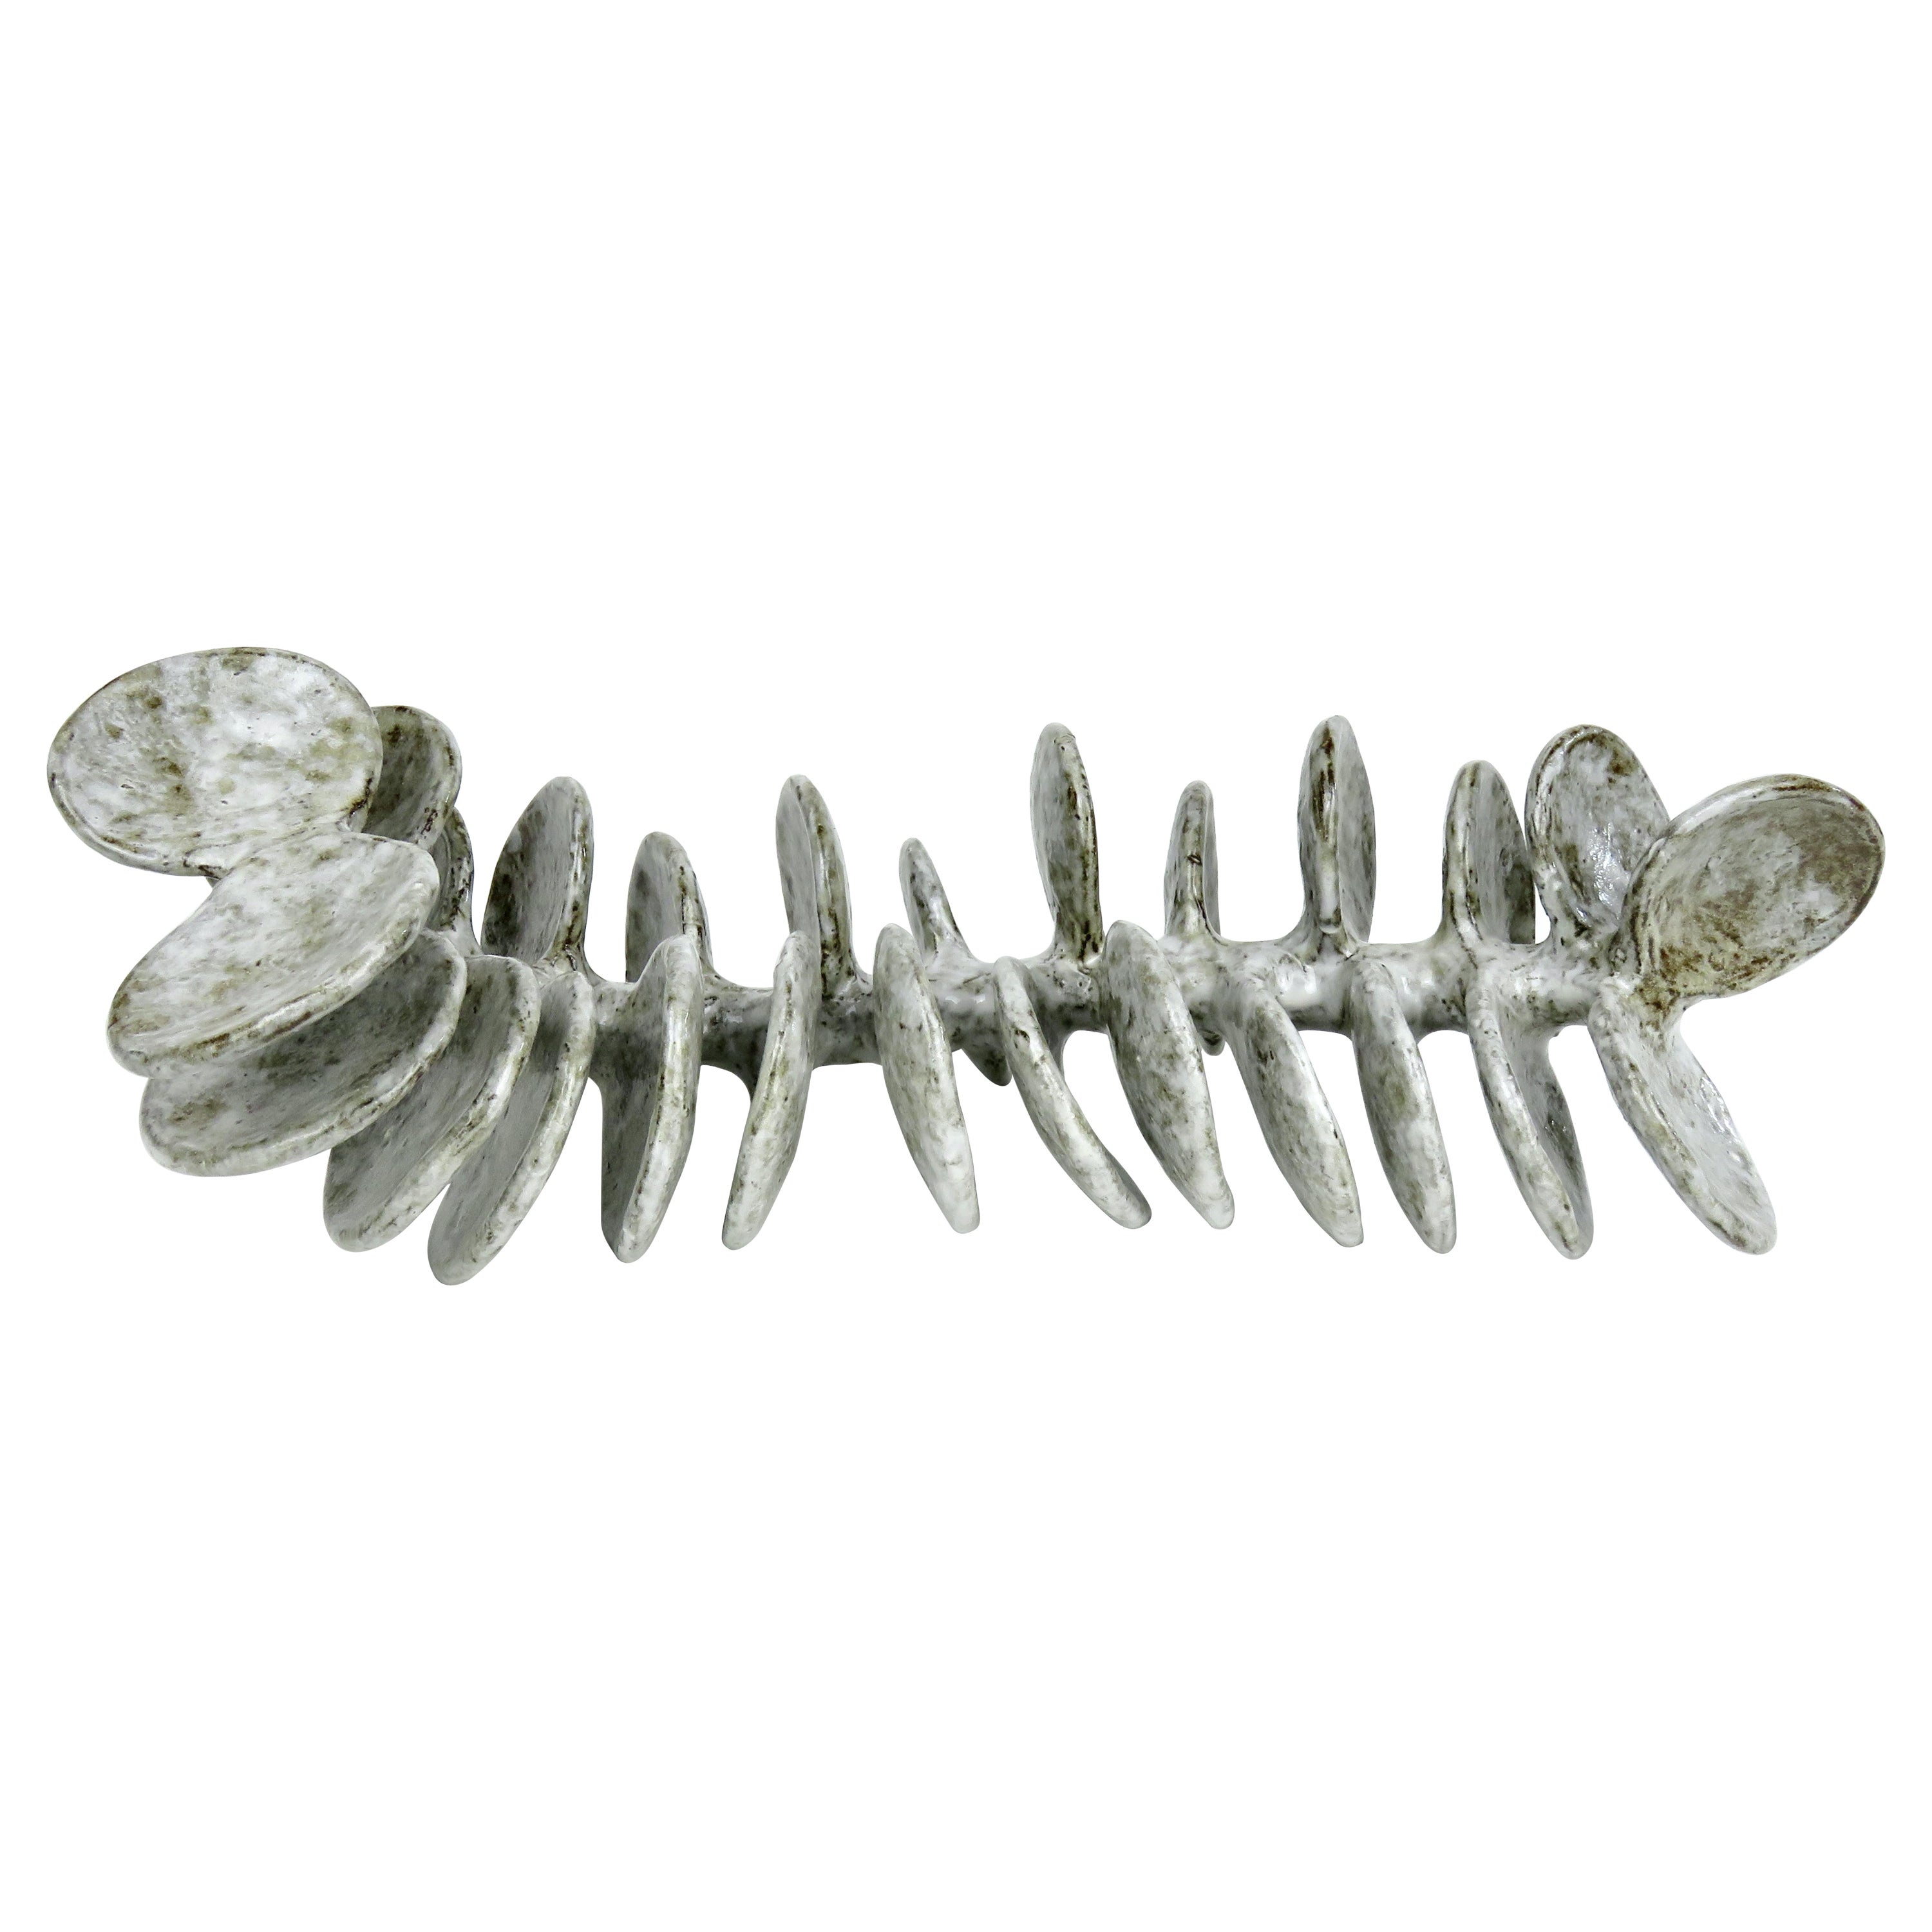 Organic Modern Ceramic Sculpture, Reclining Skeletal Spine in Mottled White and Brown For Sale